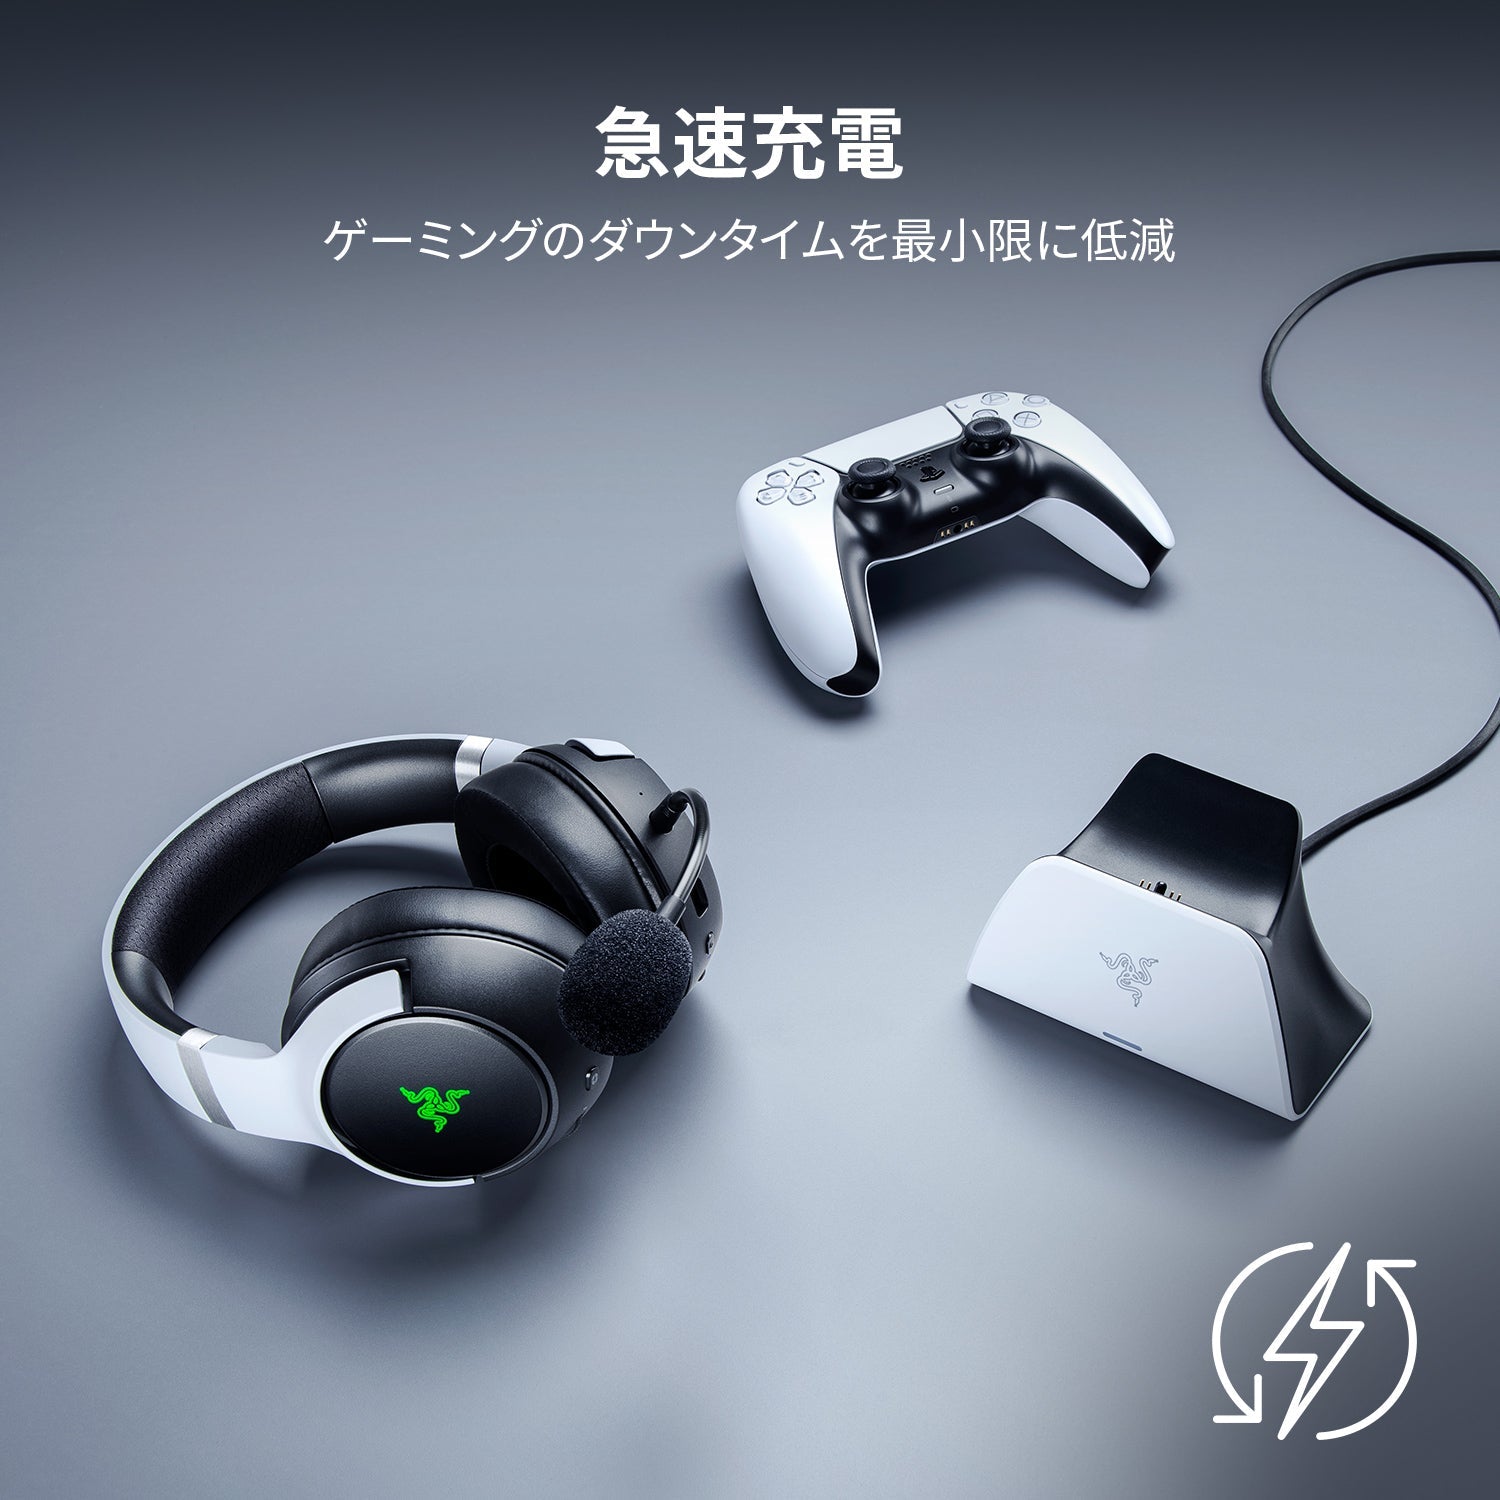 Razer Quick Charging Stand for PS5 (White) クイック チャージング スタンド ピーエスファイブ ホワイト thumbnail 2